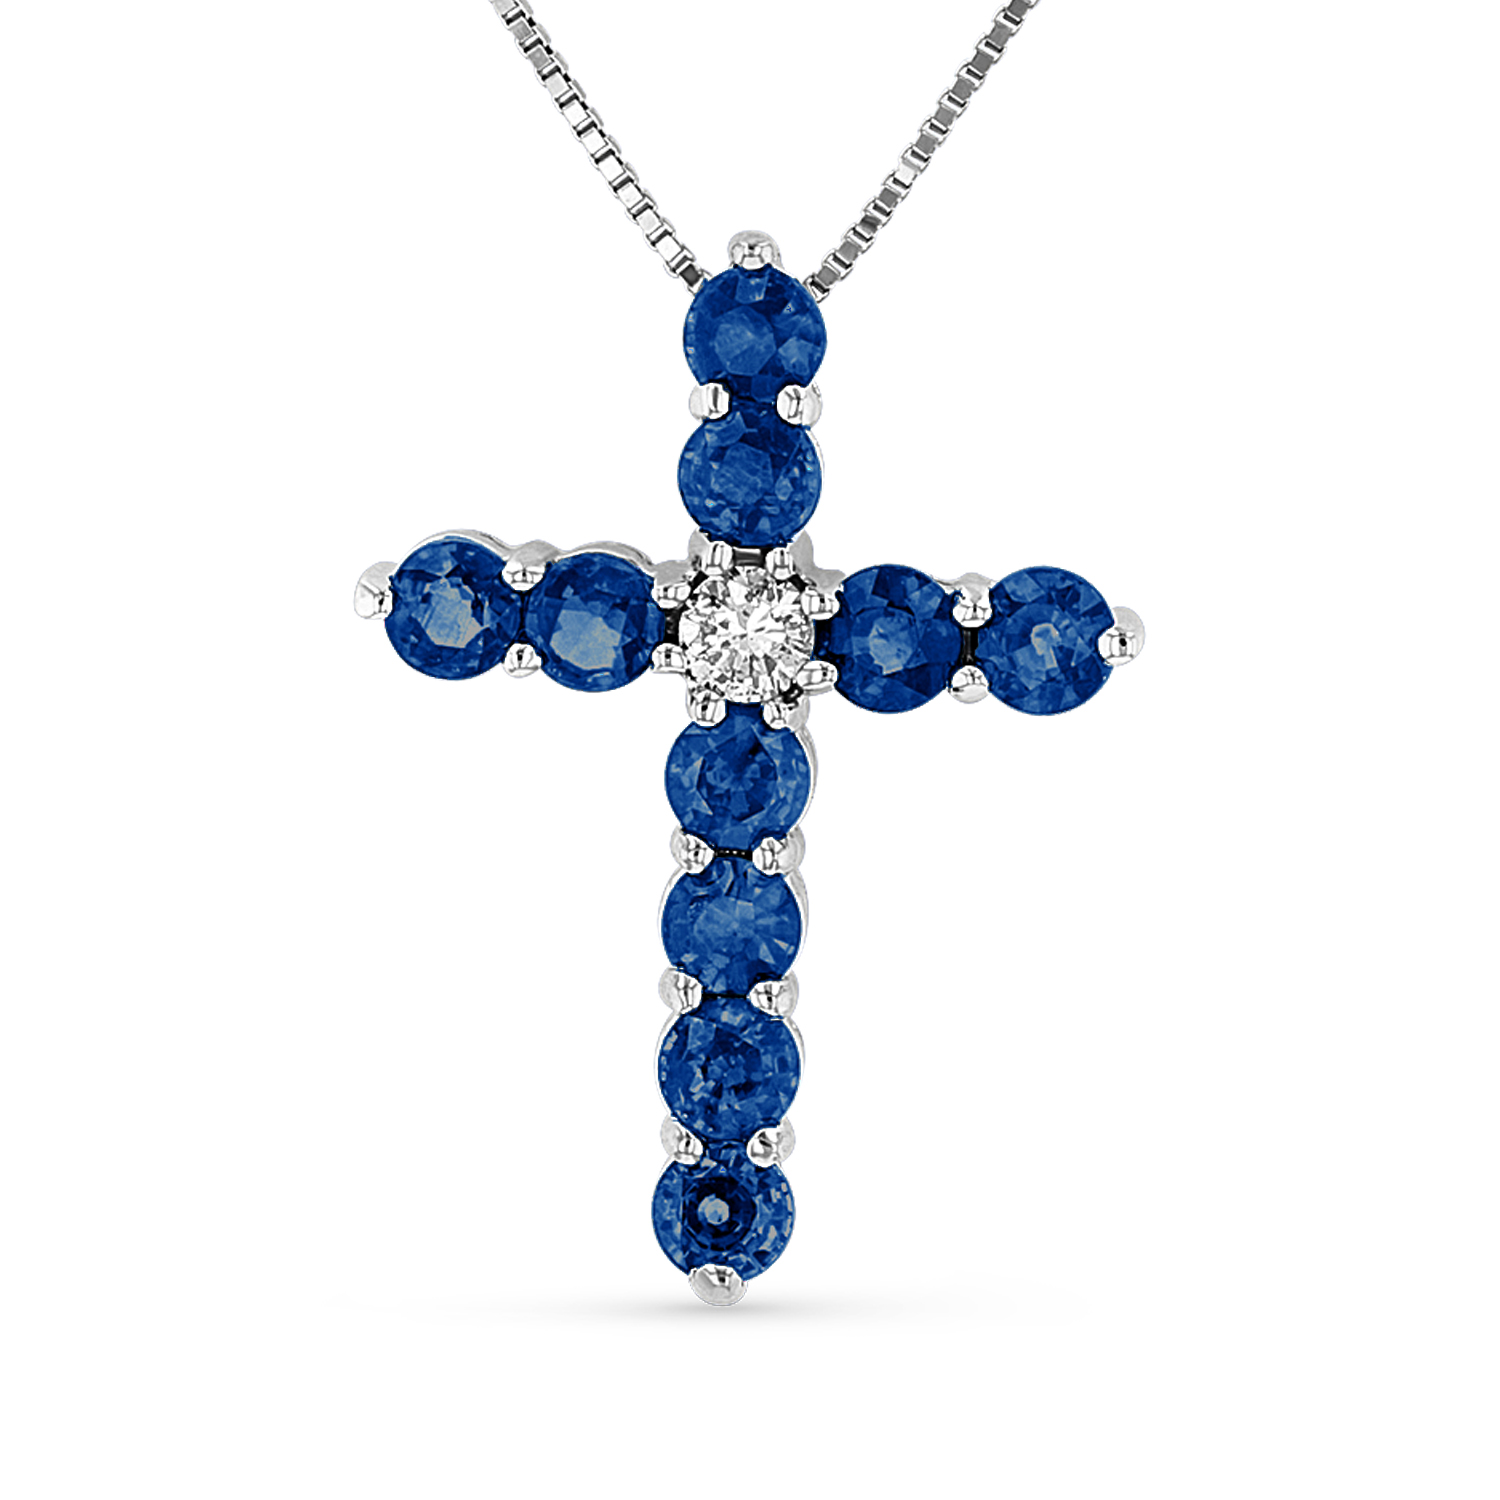 View 1.27ctw Diamond and Sapphire Cross Pendant in 14k White Gold